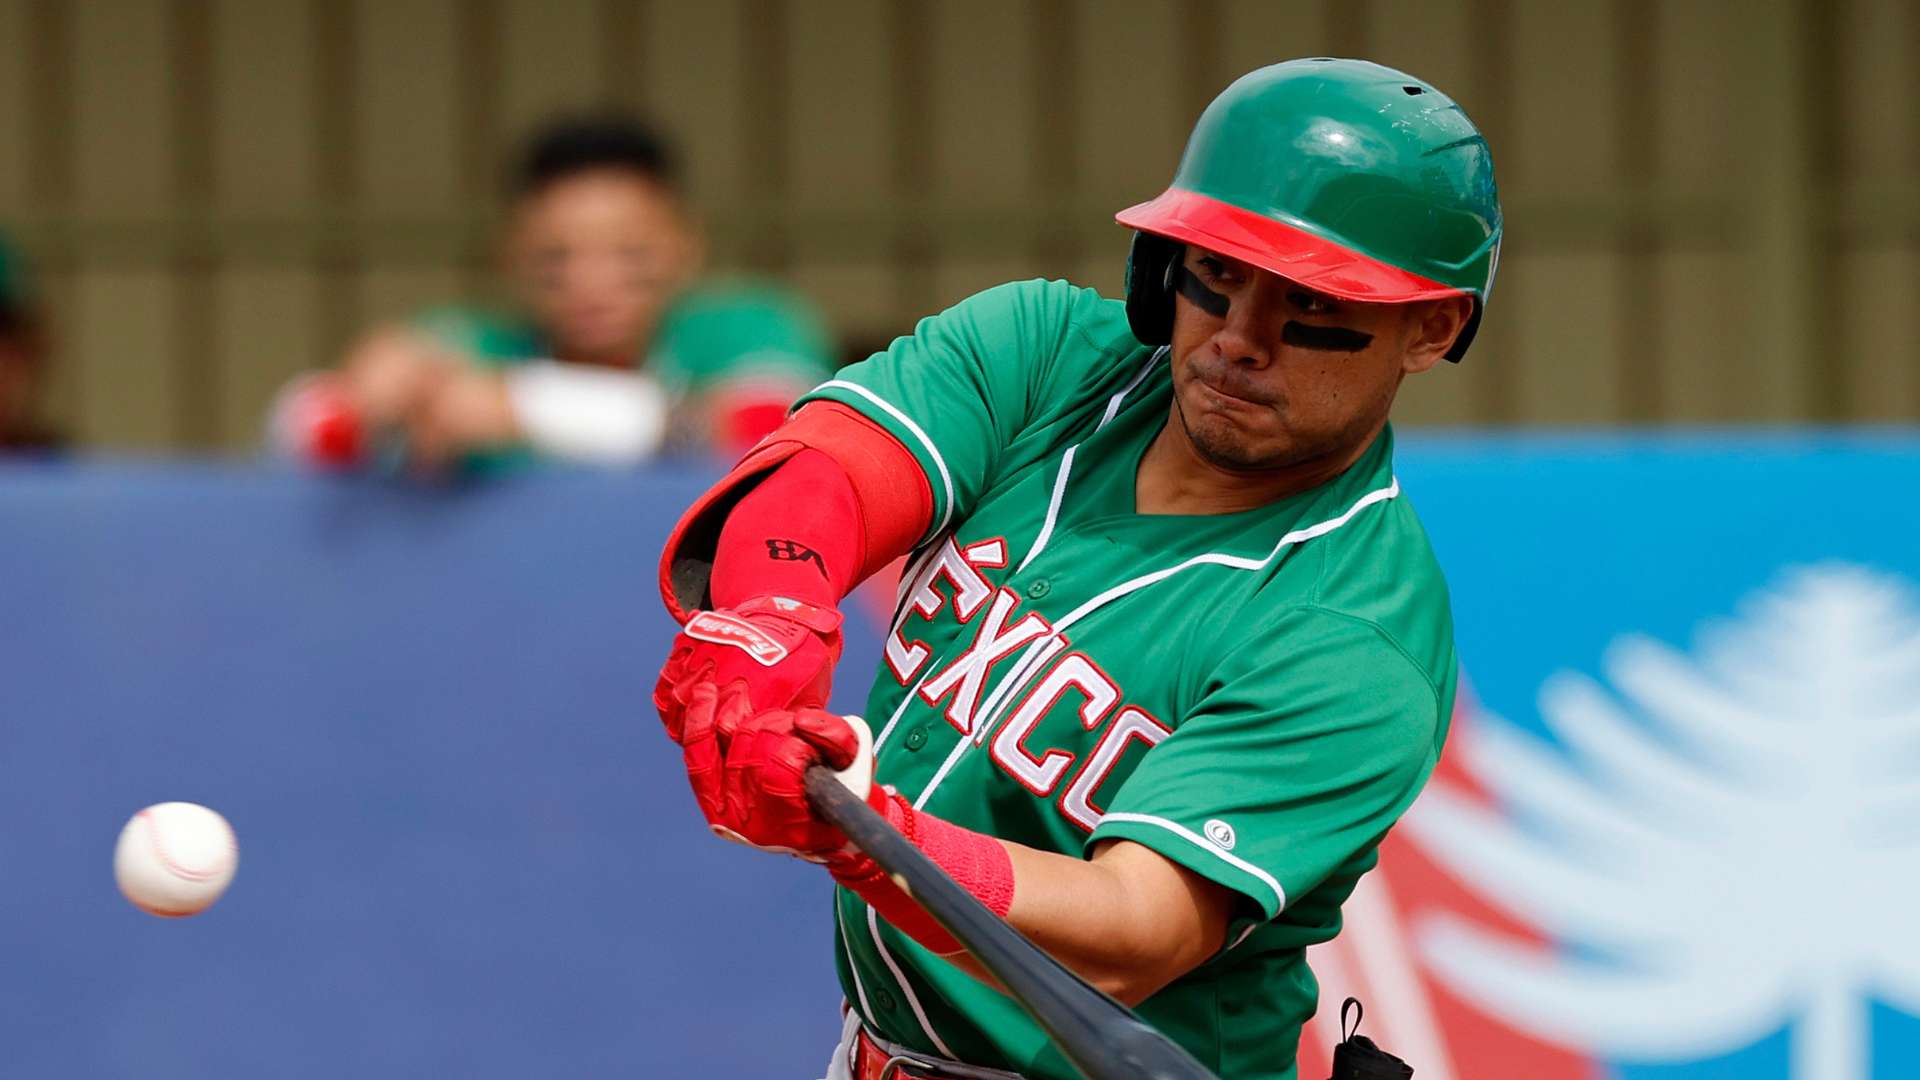 Mexico debuts with a resounding victory over Chile in the Pan American baseball